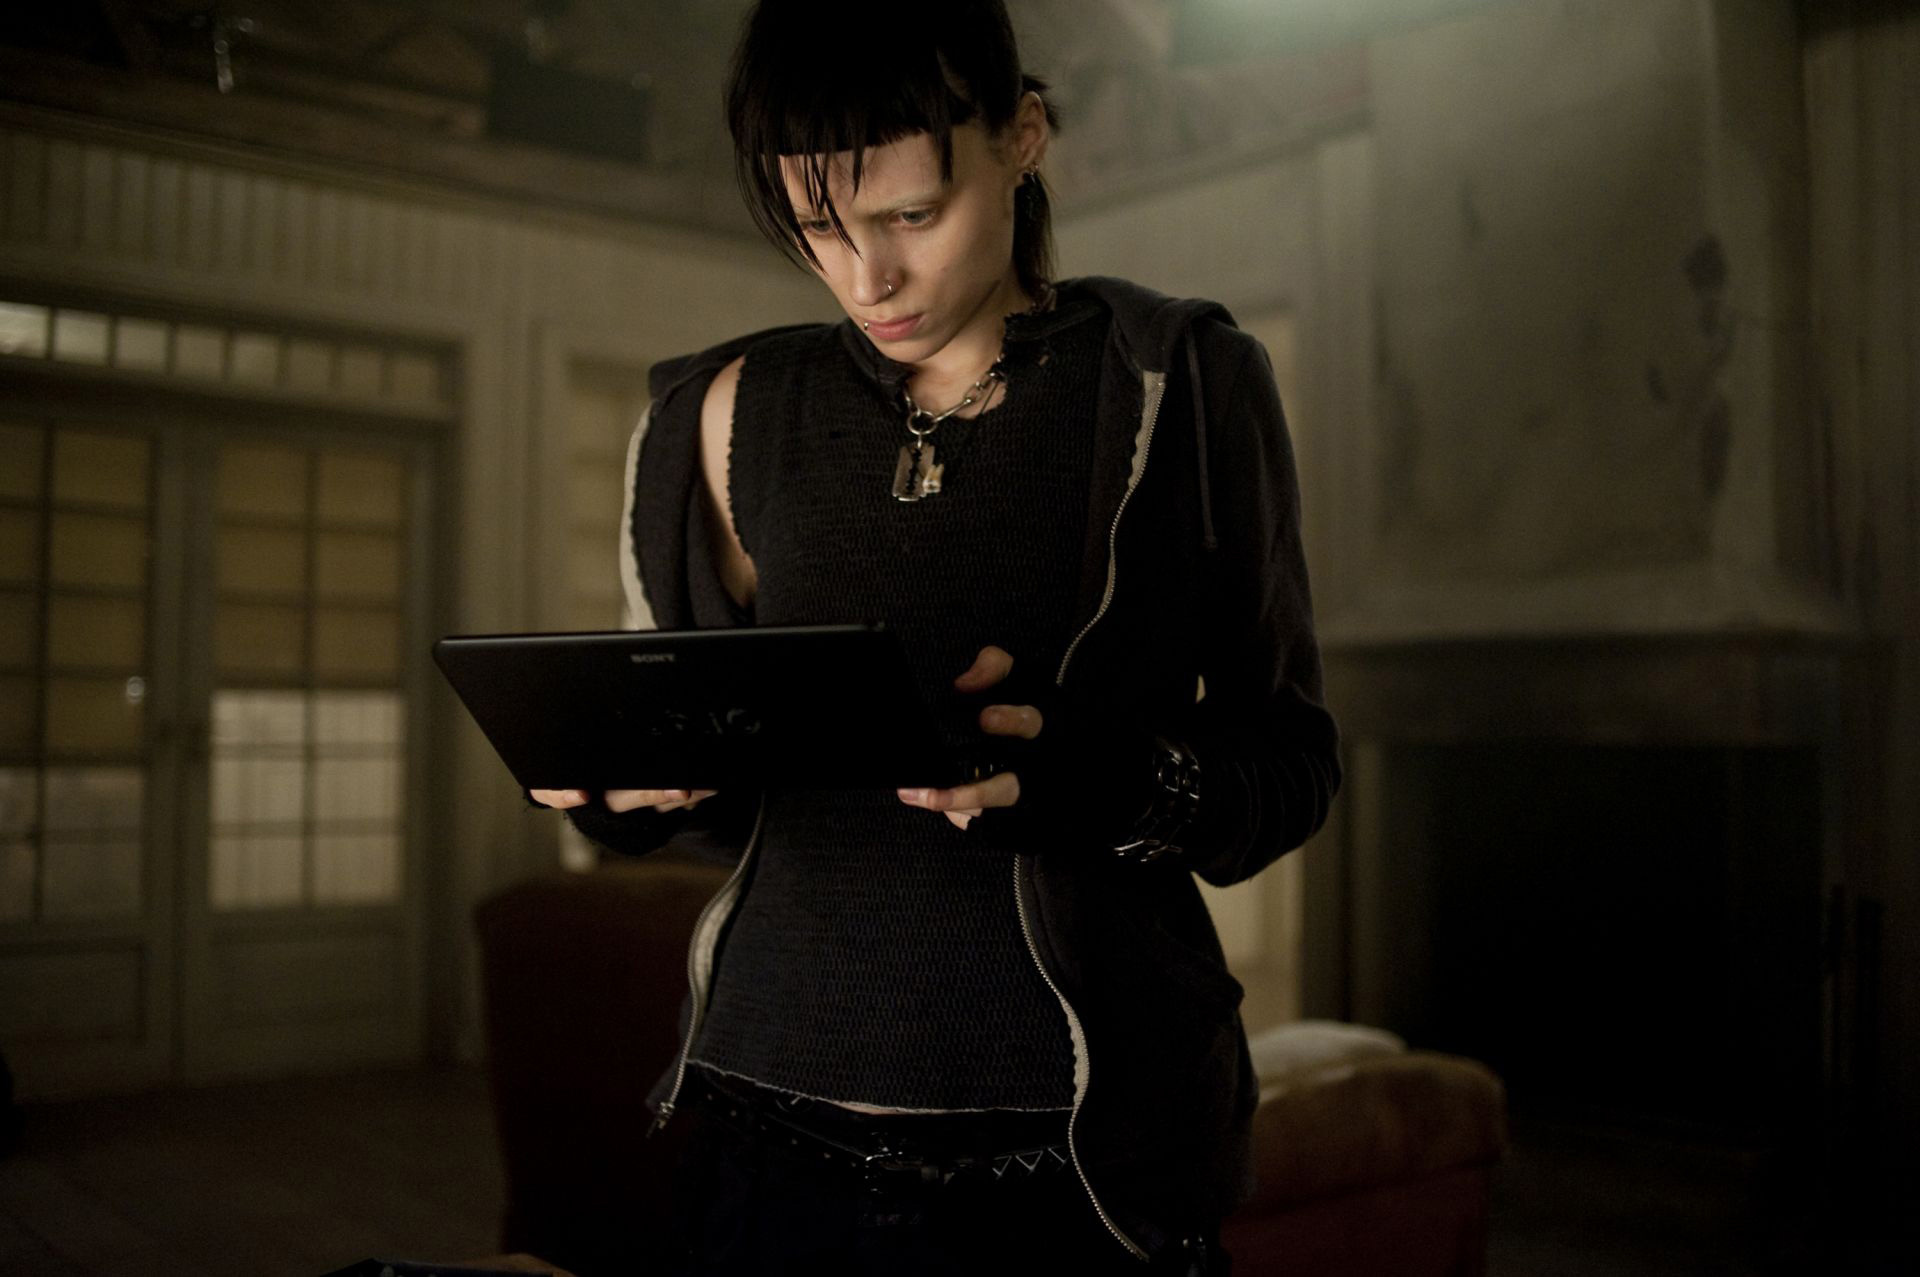 Rooney Mara, The Girl with the Dragon Tattoo, Movie wallpapers, 4K images, 1920x1280 HD Desktop